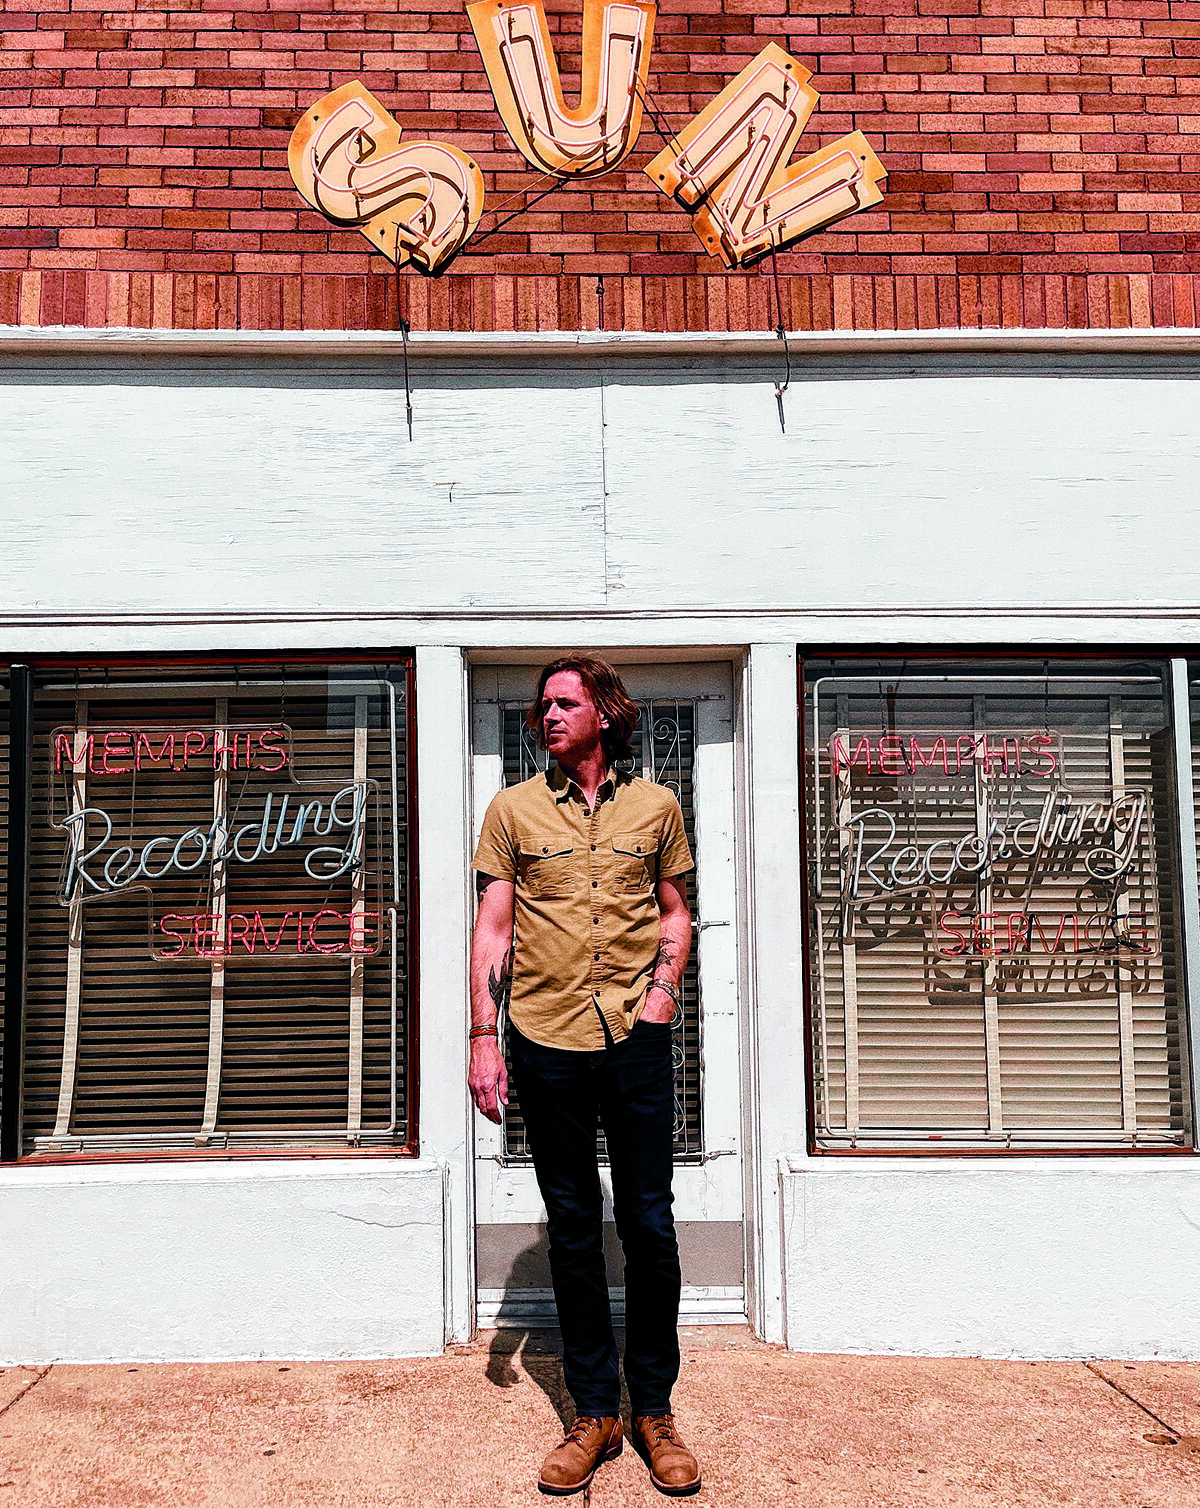 Stuart Smith stands outside Sun Studio in Memphis, Tennessee. The studio is considered the birthplace of rock 'n' roll music, launching the careers of performers such as Roy Orbison, Johnny Cash, Elvis Presley and Jerry Lee Lewis.